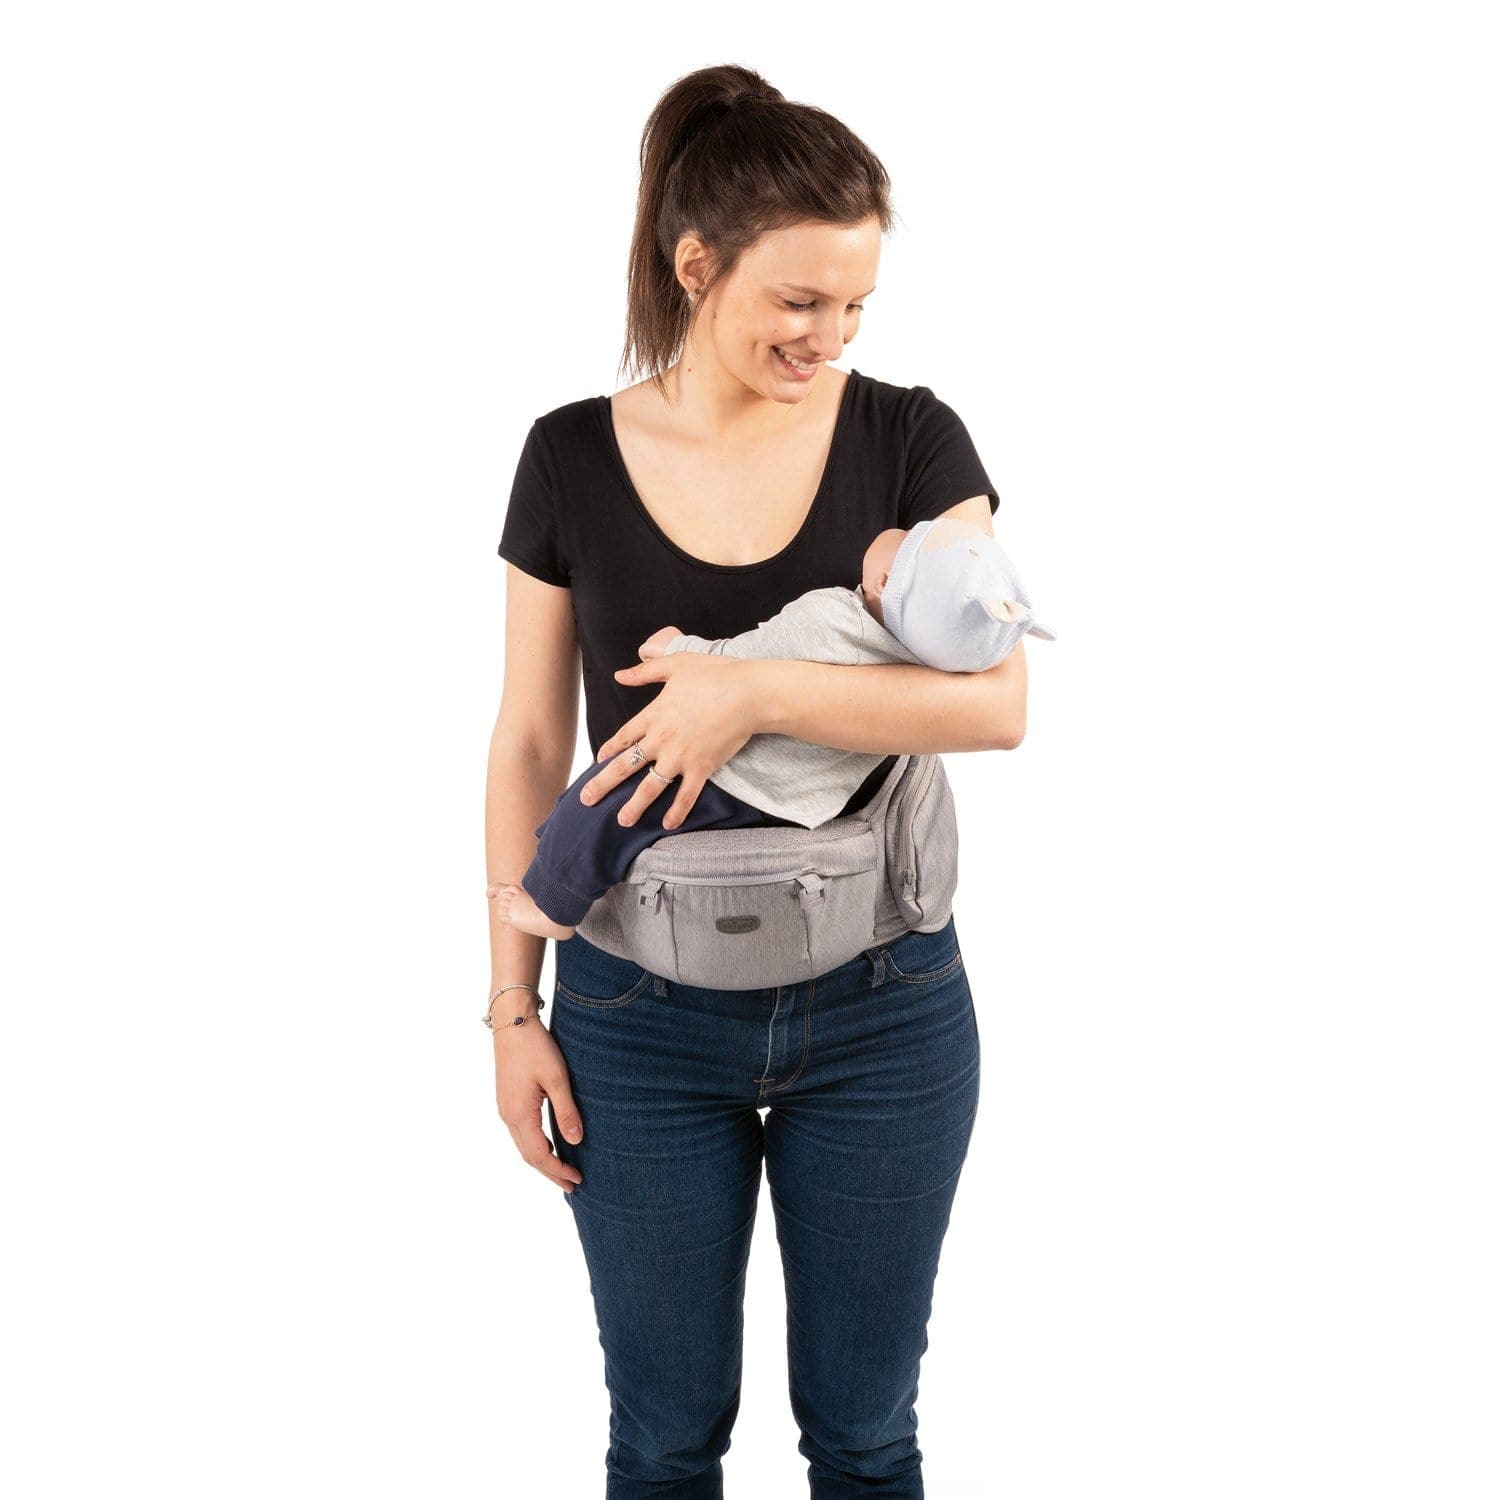 HIP SEAT BABY CARRIER HAZELWOOD